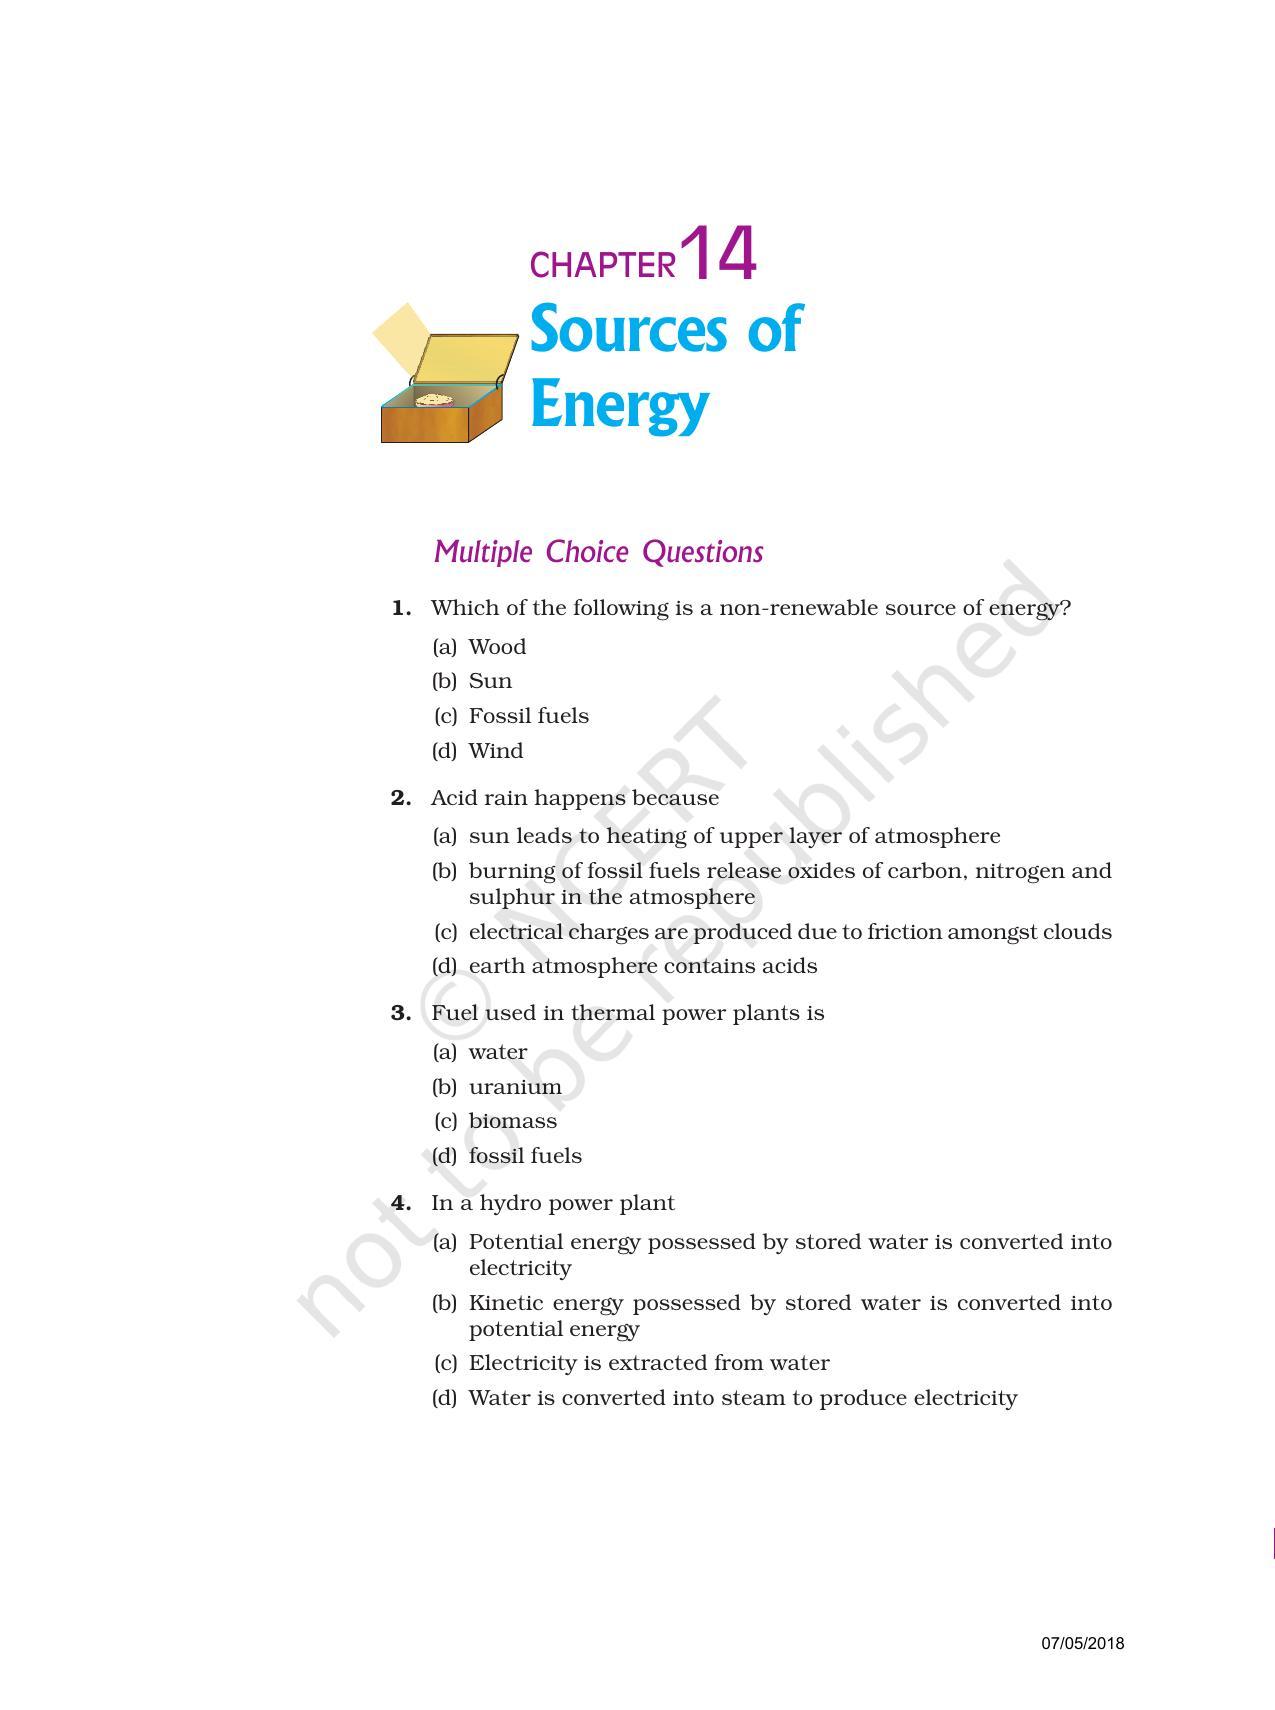 NCERT Exemplar Book for Class 10 Science: Chapter 14 Sources of Energy - Page 1